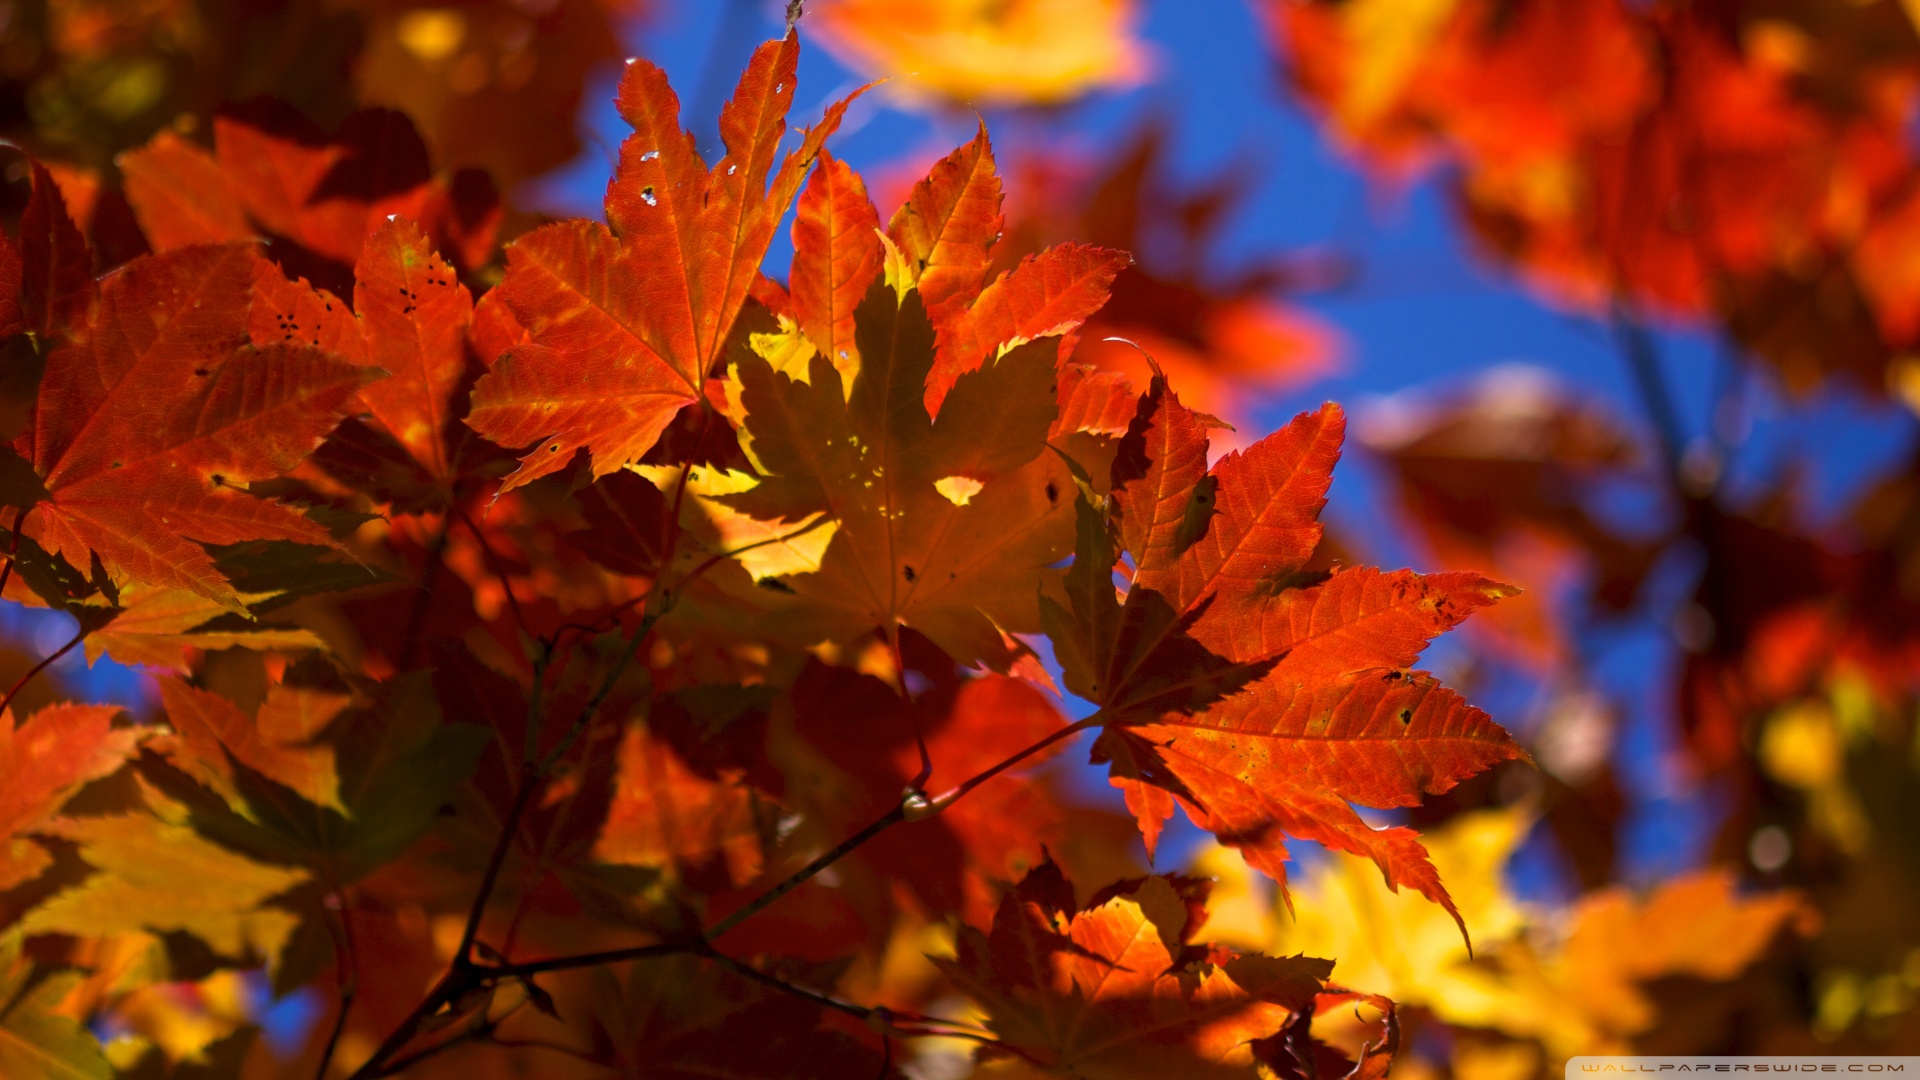 Download Bright Autumn Leaves Wallpaper 1920x1080